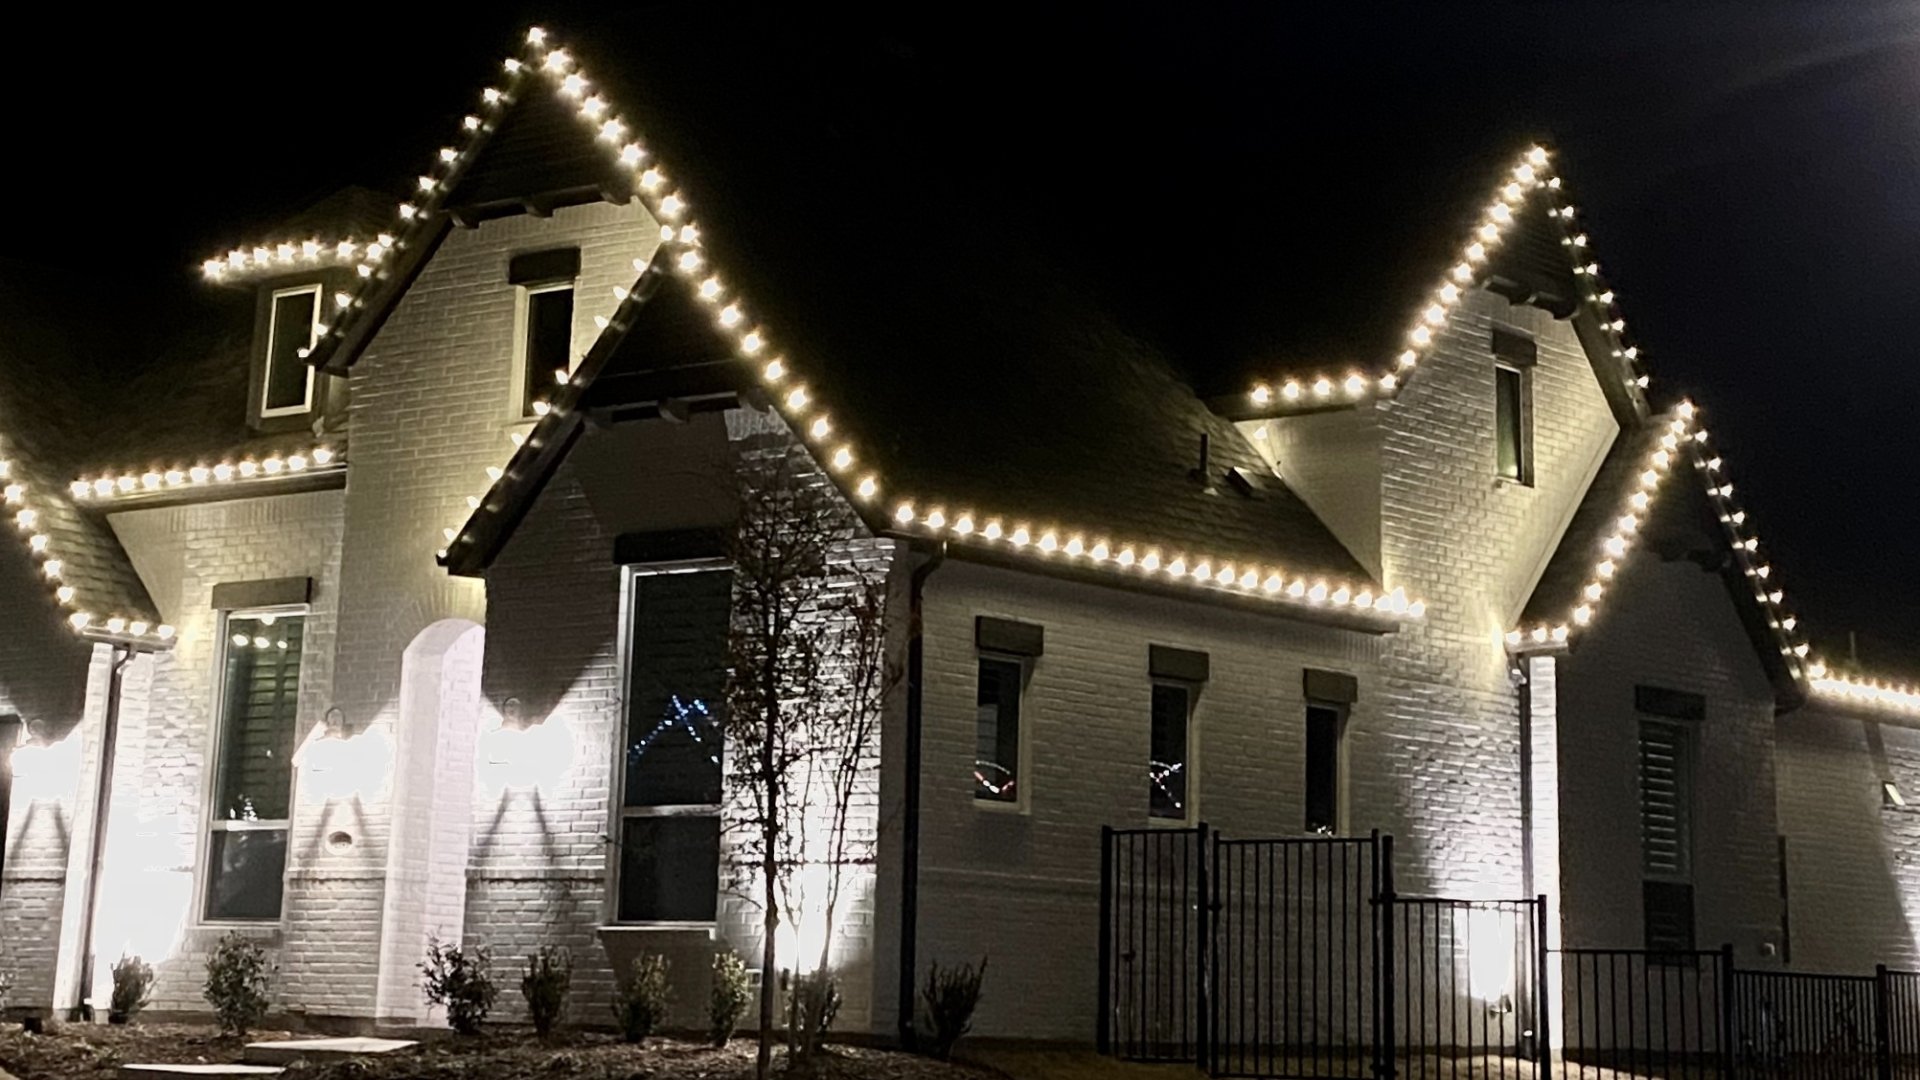 LED Bulbs Are a Must for Your Holiday Lighting!